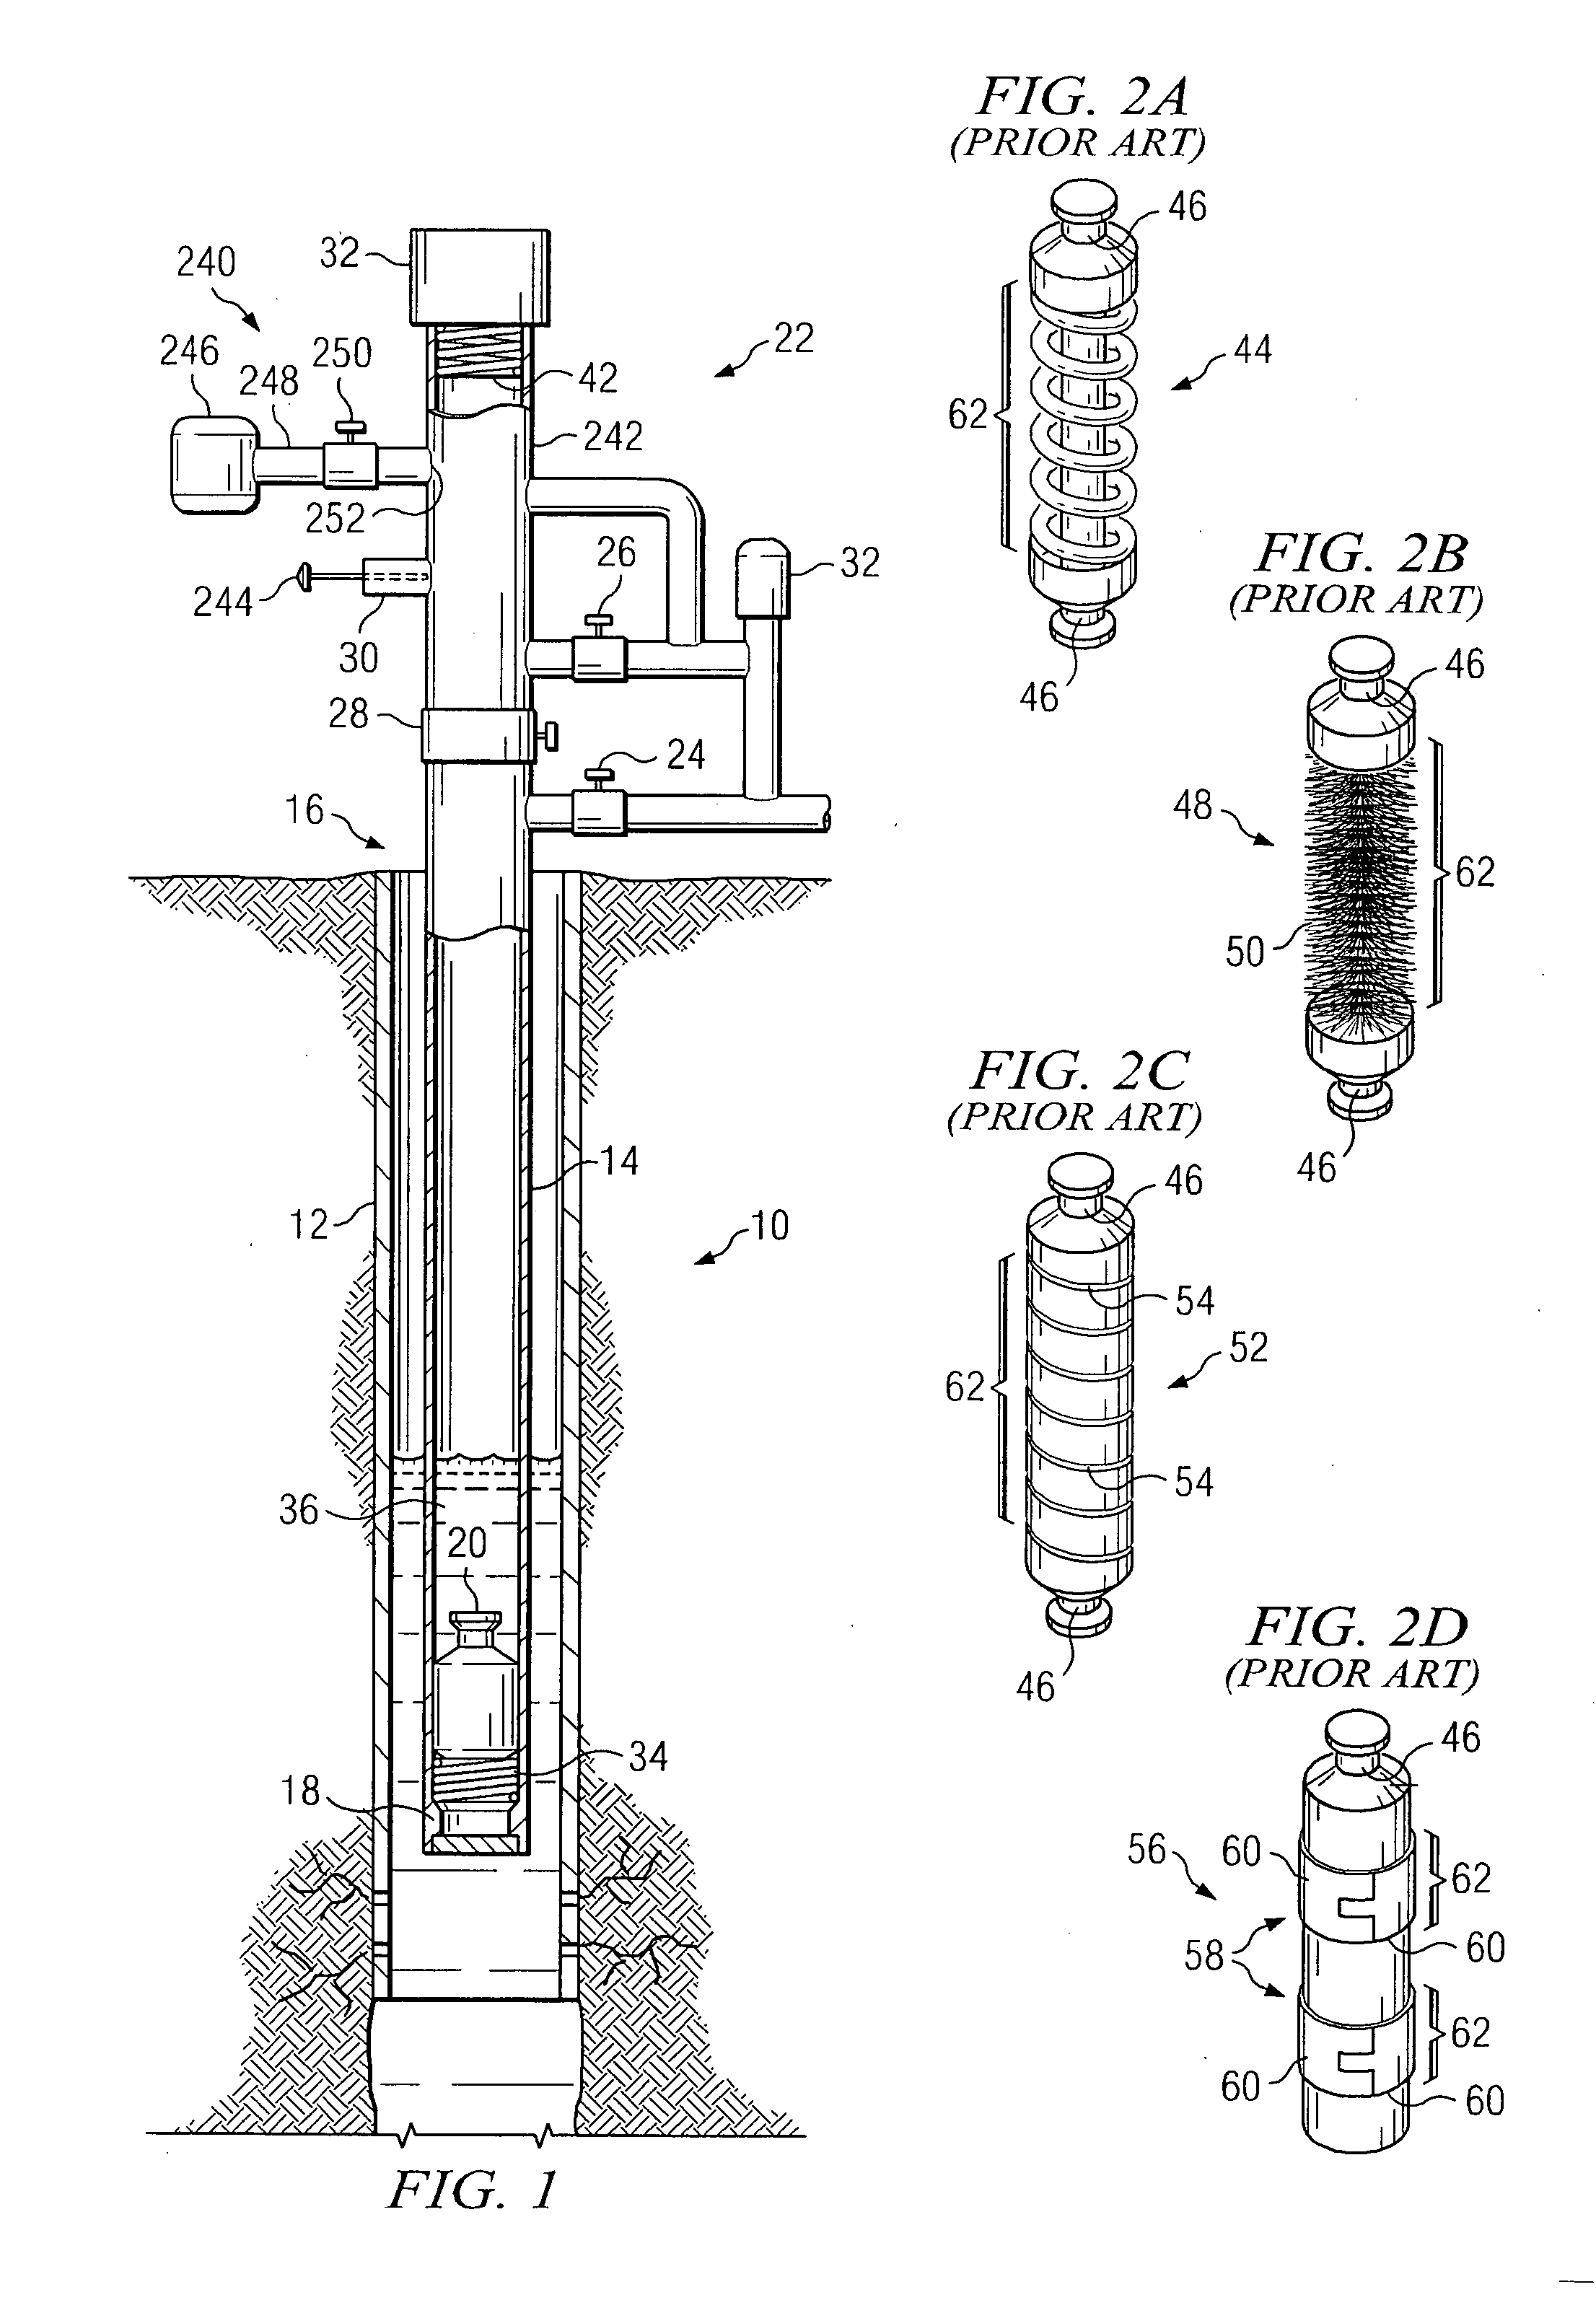 Well chemical treatment utilizing plunger lift delivery system